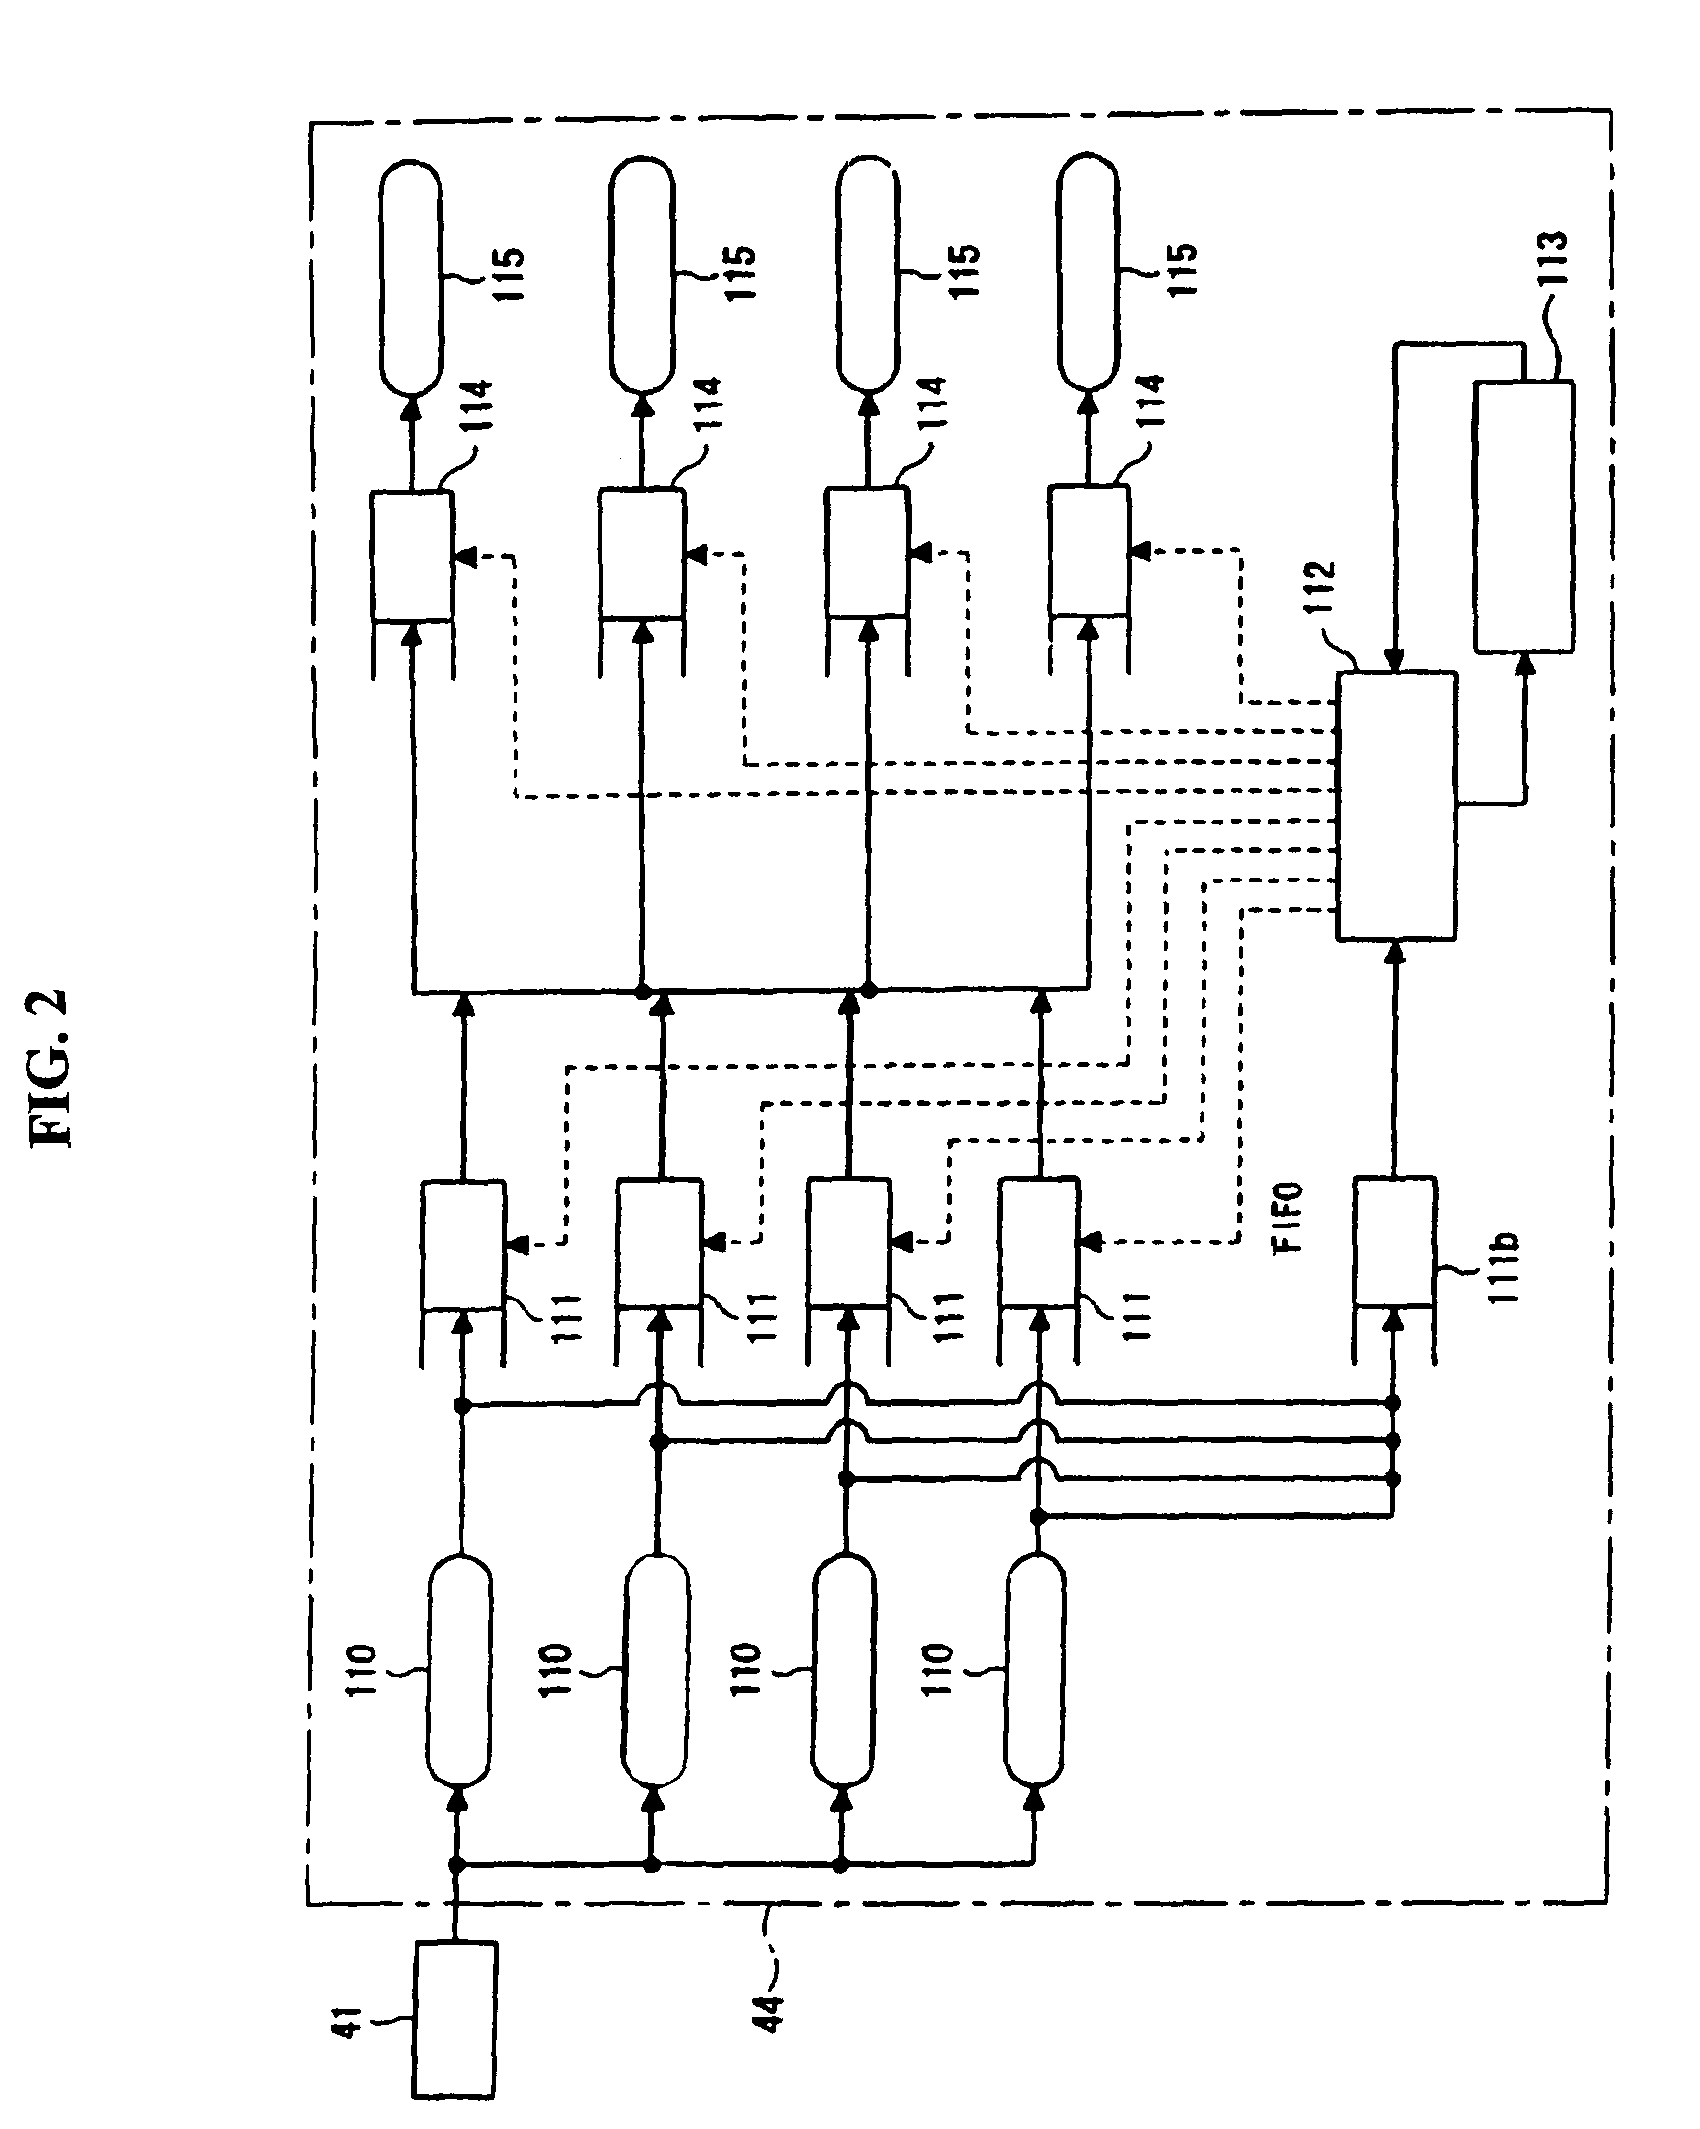 Ethernet frame and synchronous optical network (SONET) frame convertible interface device and frame transmission method